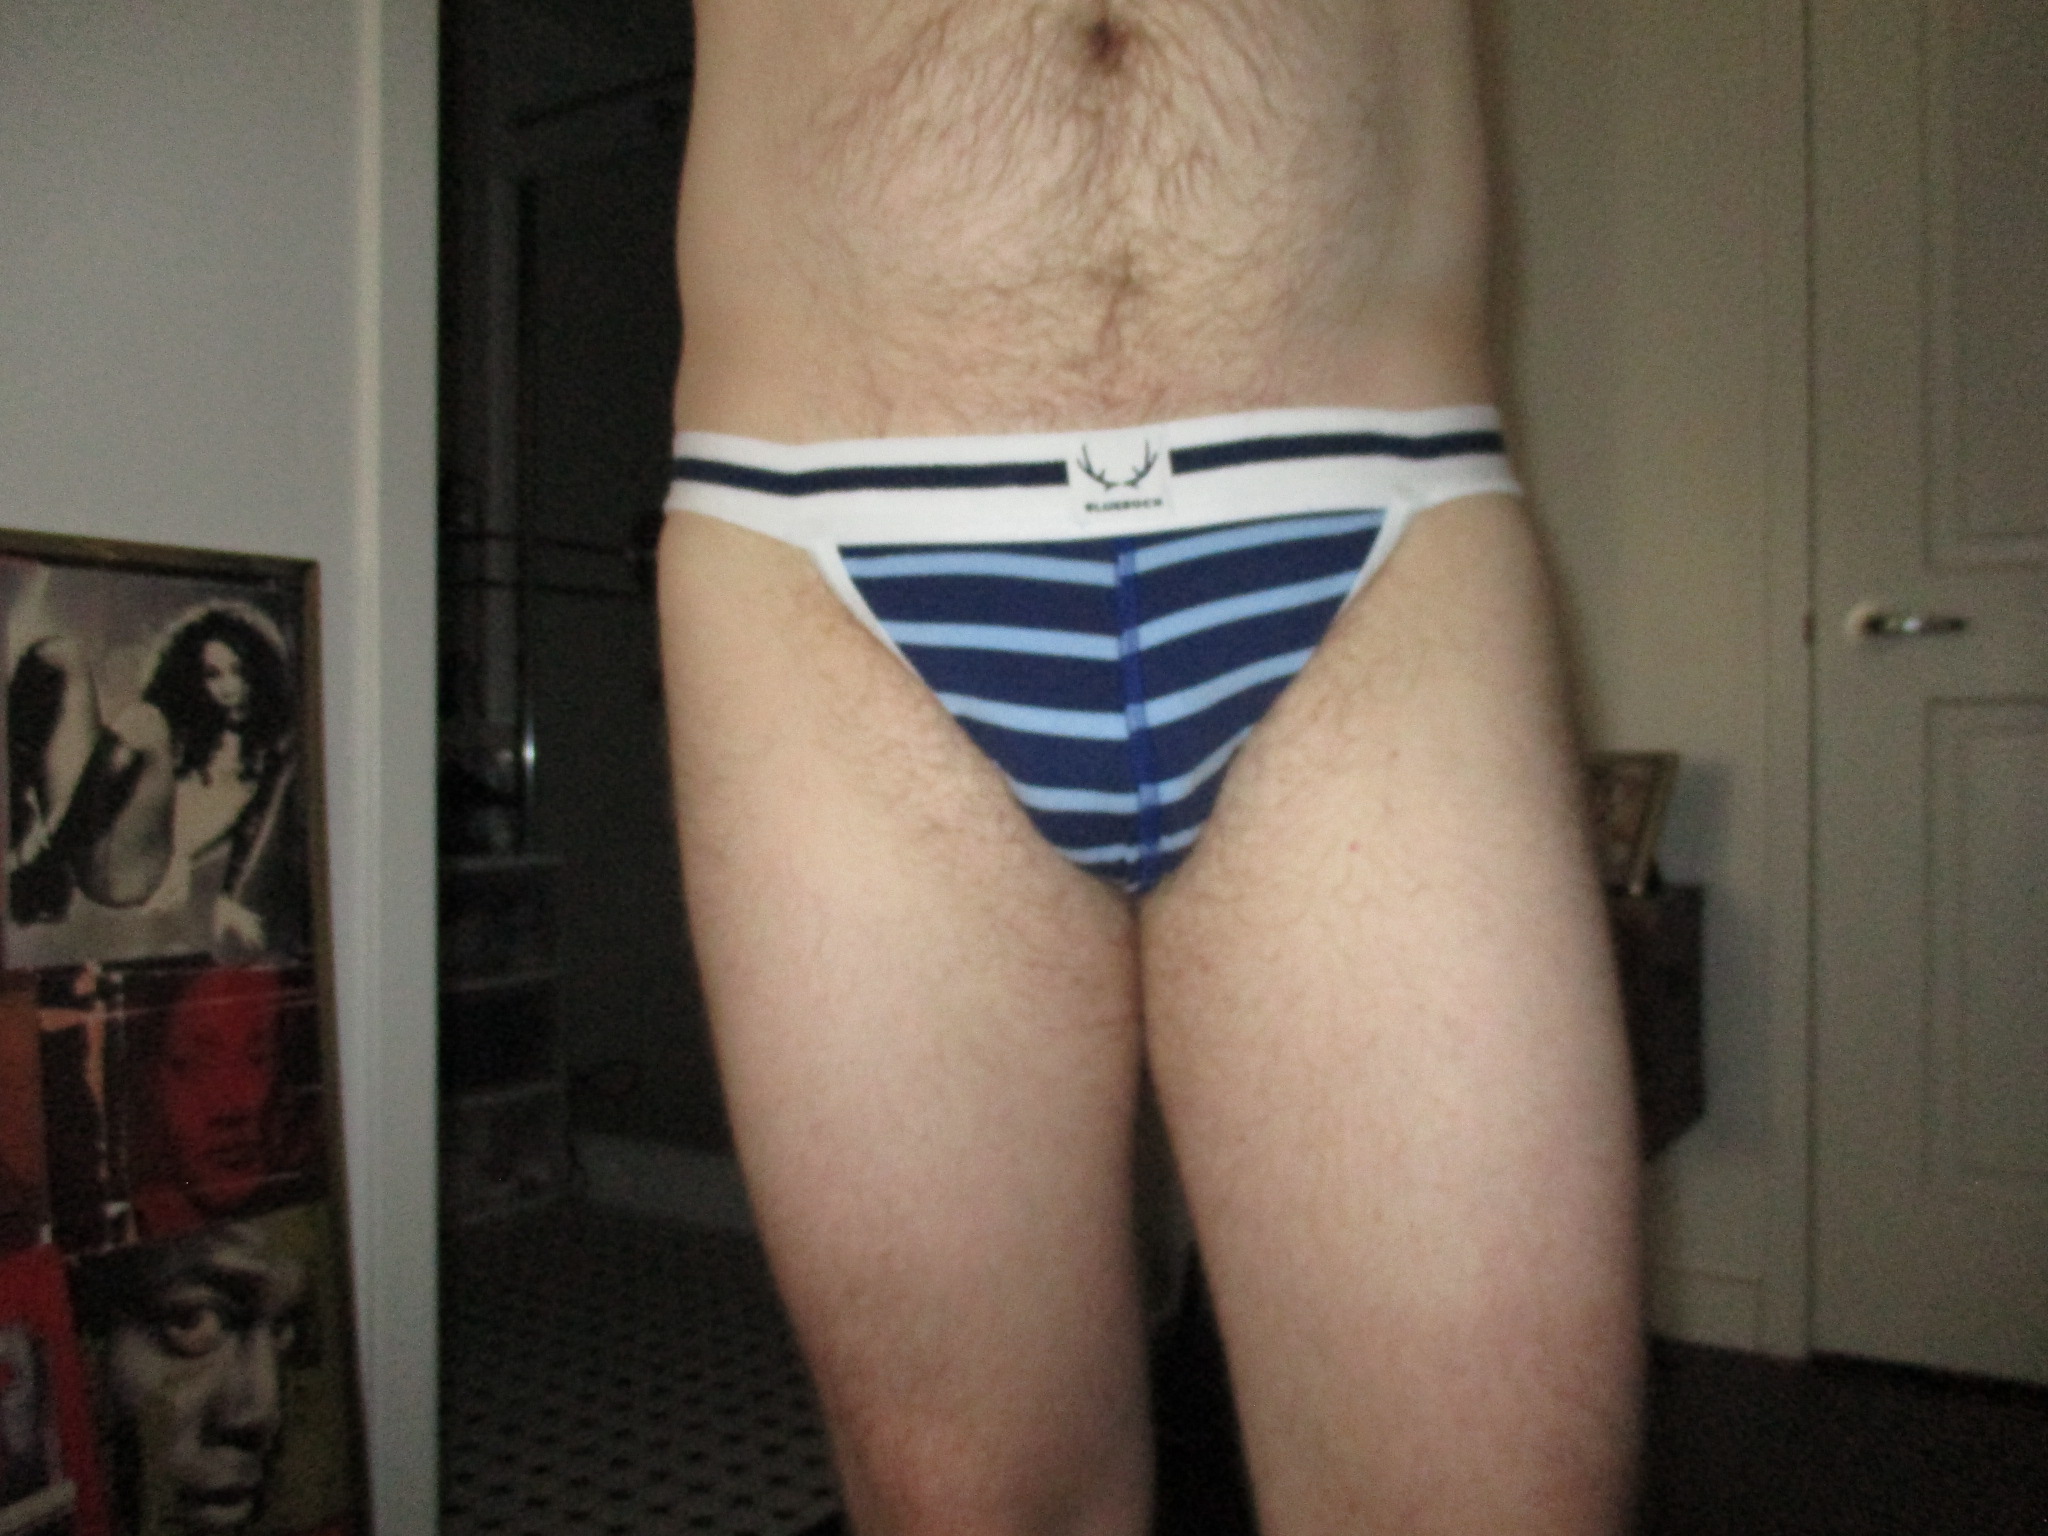 Bluebuck, stripes and a jockstrap all in one…